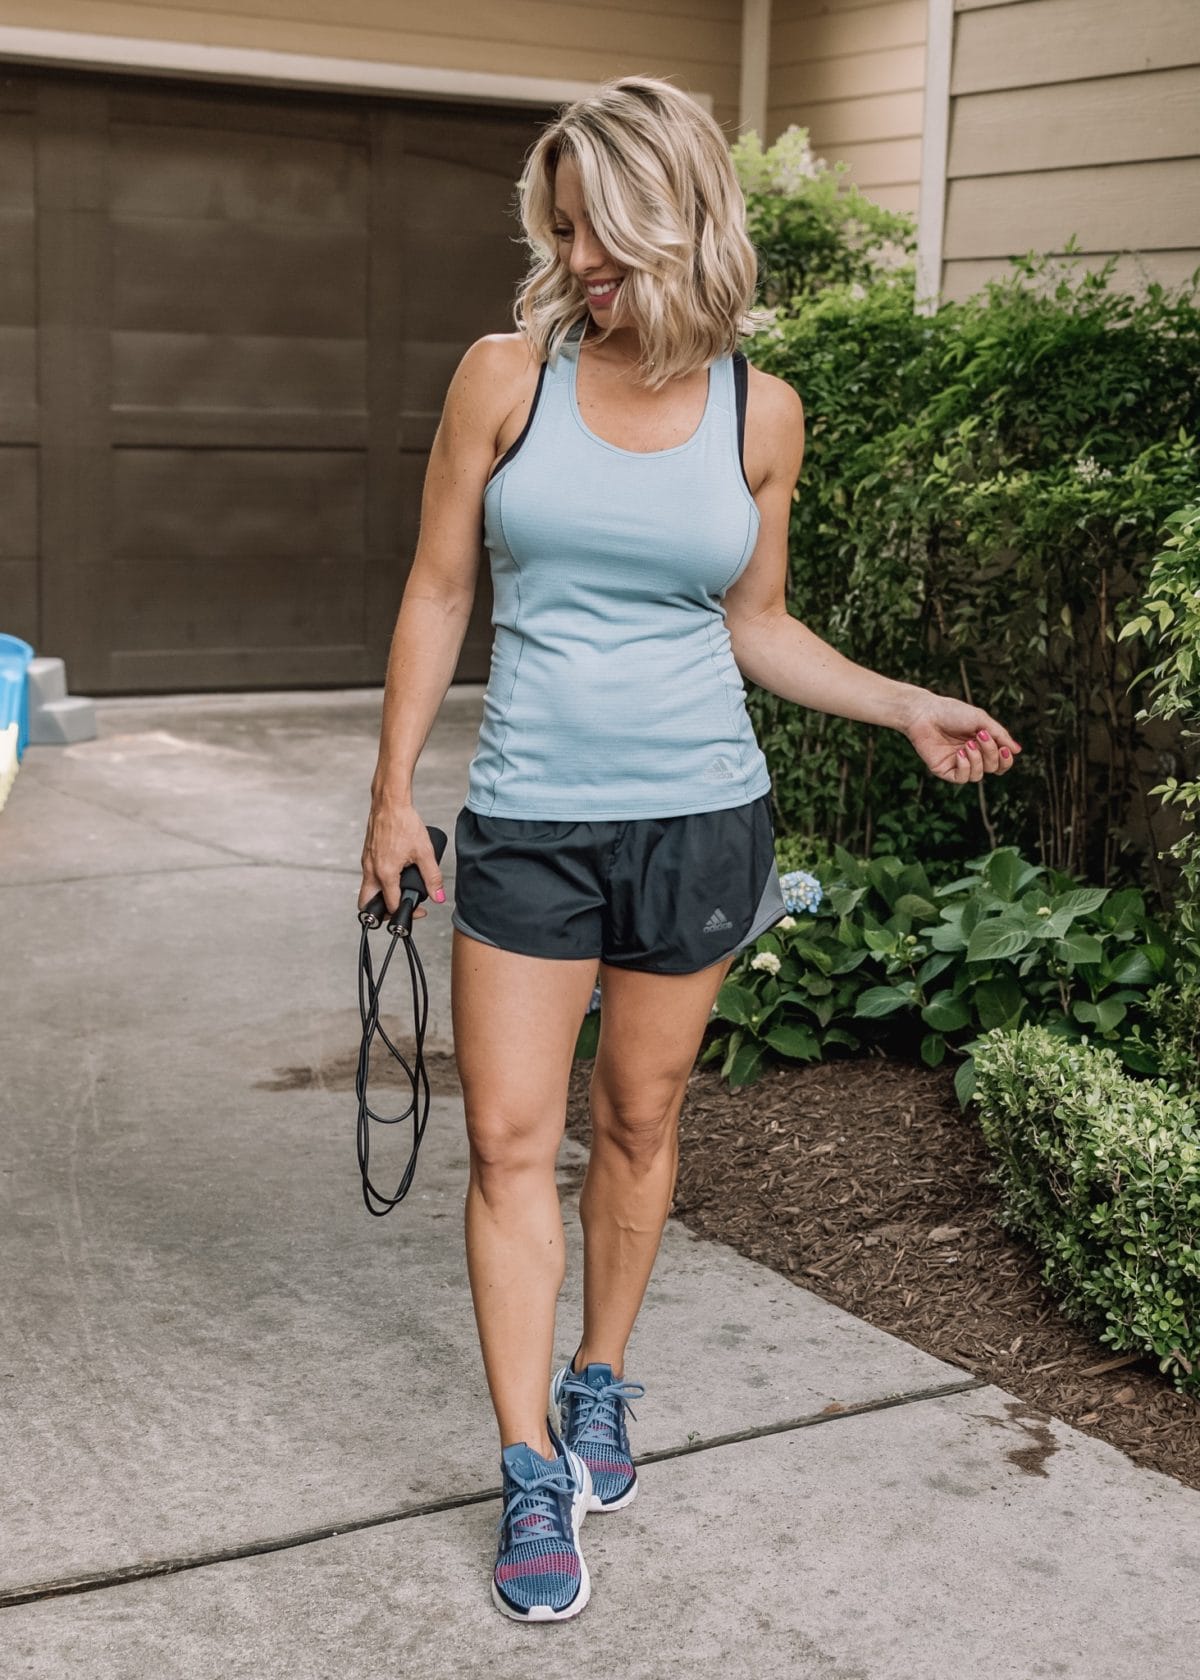 If you're running or jumping with a larger chest, you definitely need a good sports bra.  The one I'm wearing from adidas has high compression for ultra support to keep everything in place, with a mesh back panel and lining.  I also like the convertible straps that lets you adjust it to get the perfect fit.